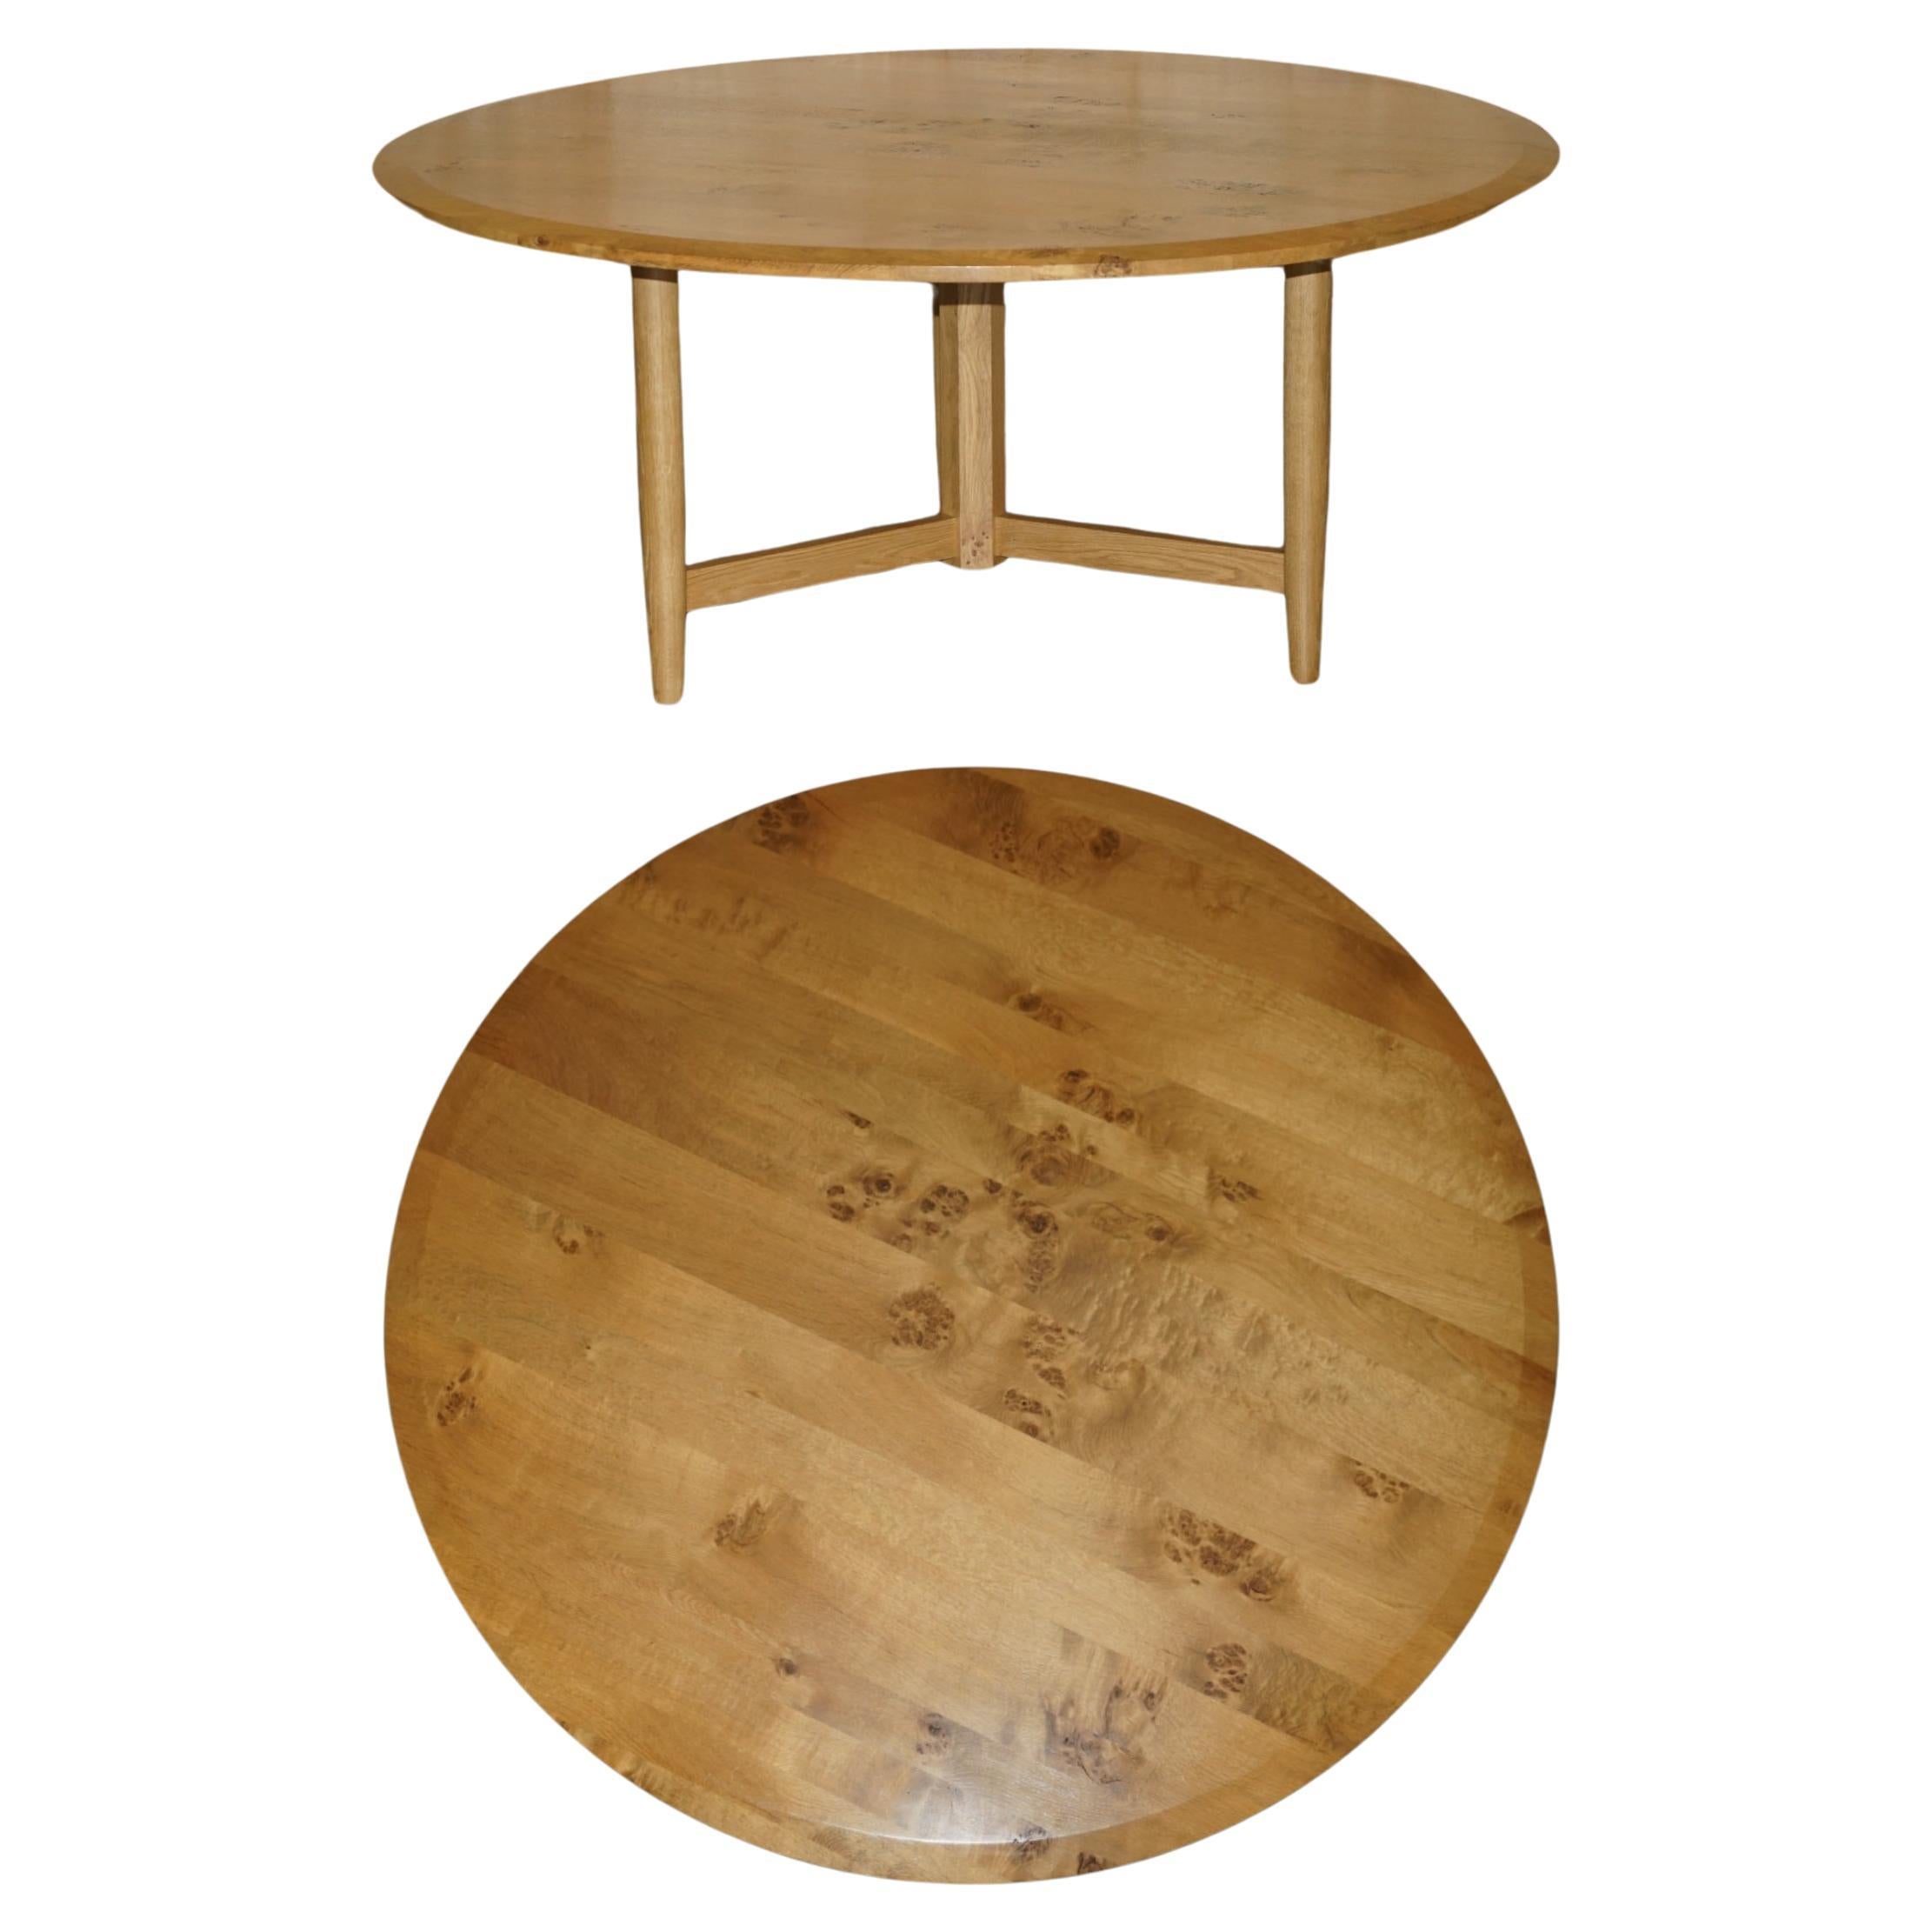 STUNNiNG LARGE 170CM WIDE POLLARD PIPPY BURR OAK ROUND DINING TABLE SEATS EIGHT For Sale